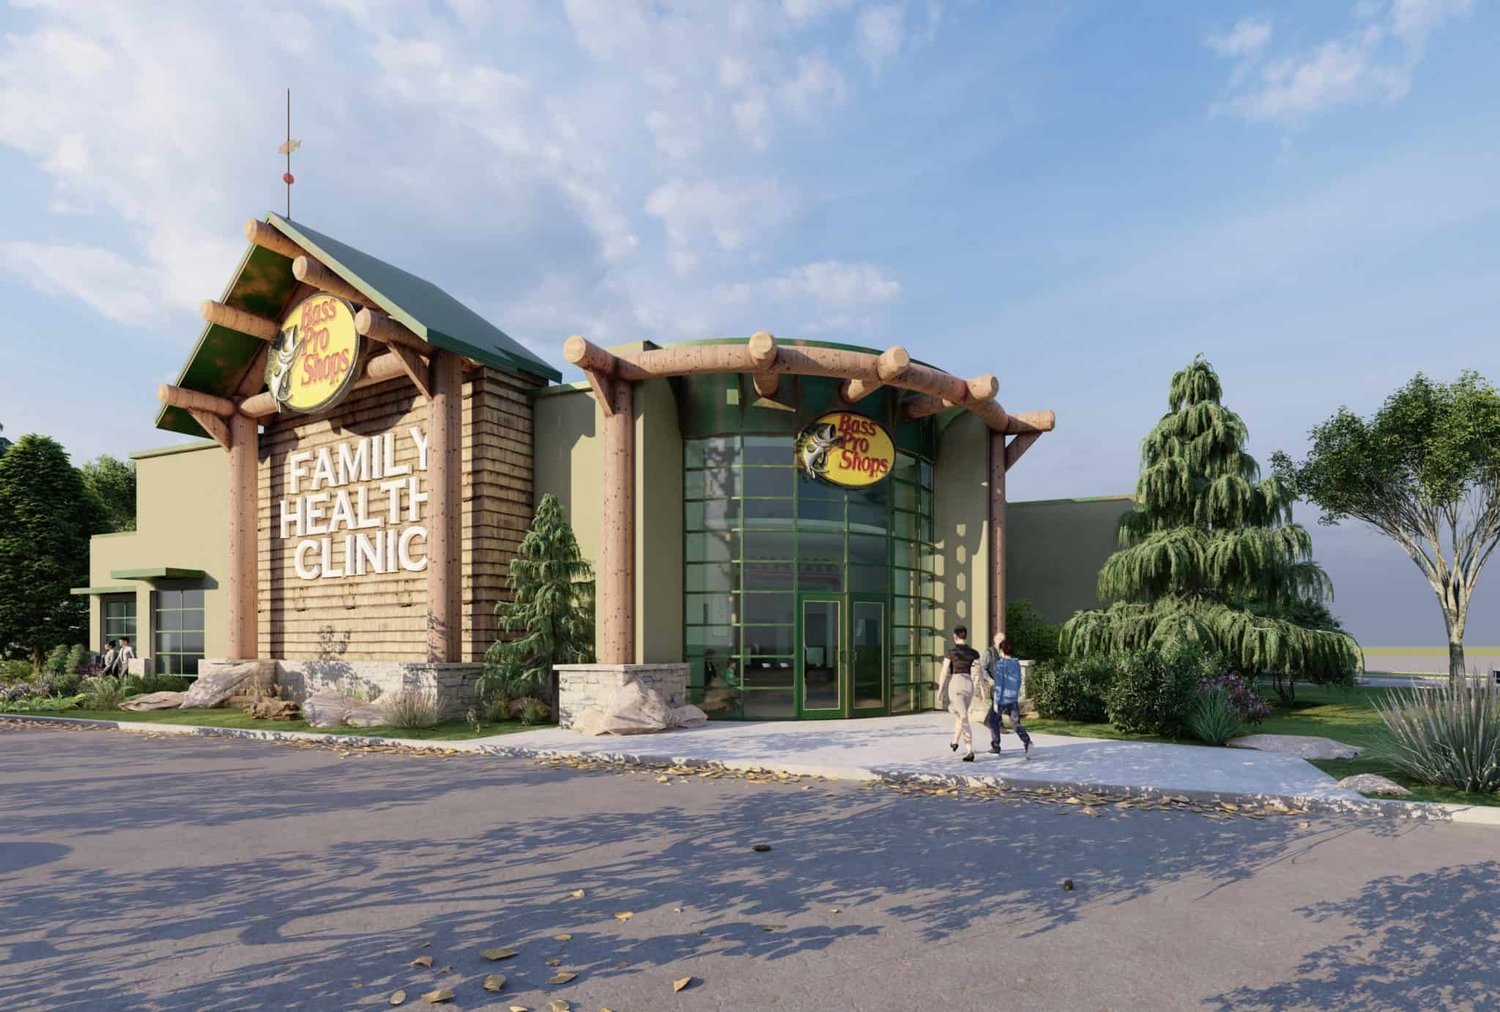 Bass Pro Shops is renovating a former bus station into its new Family Health Center.